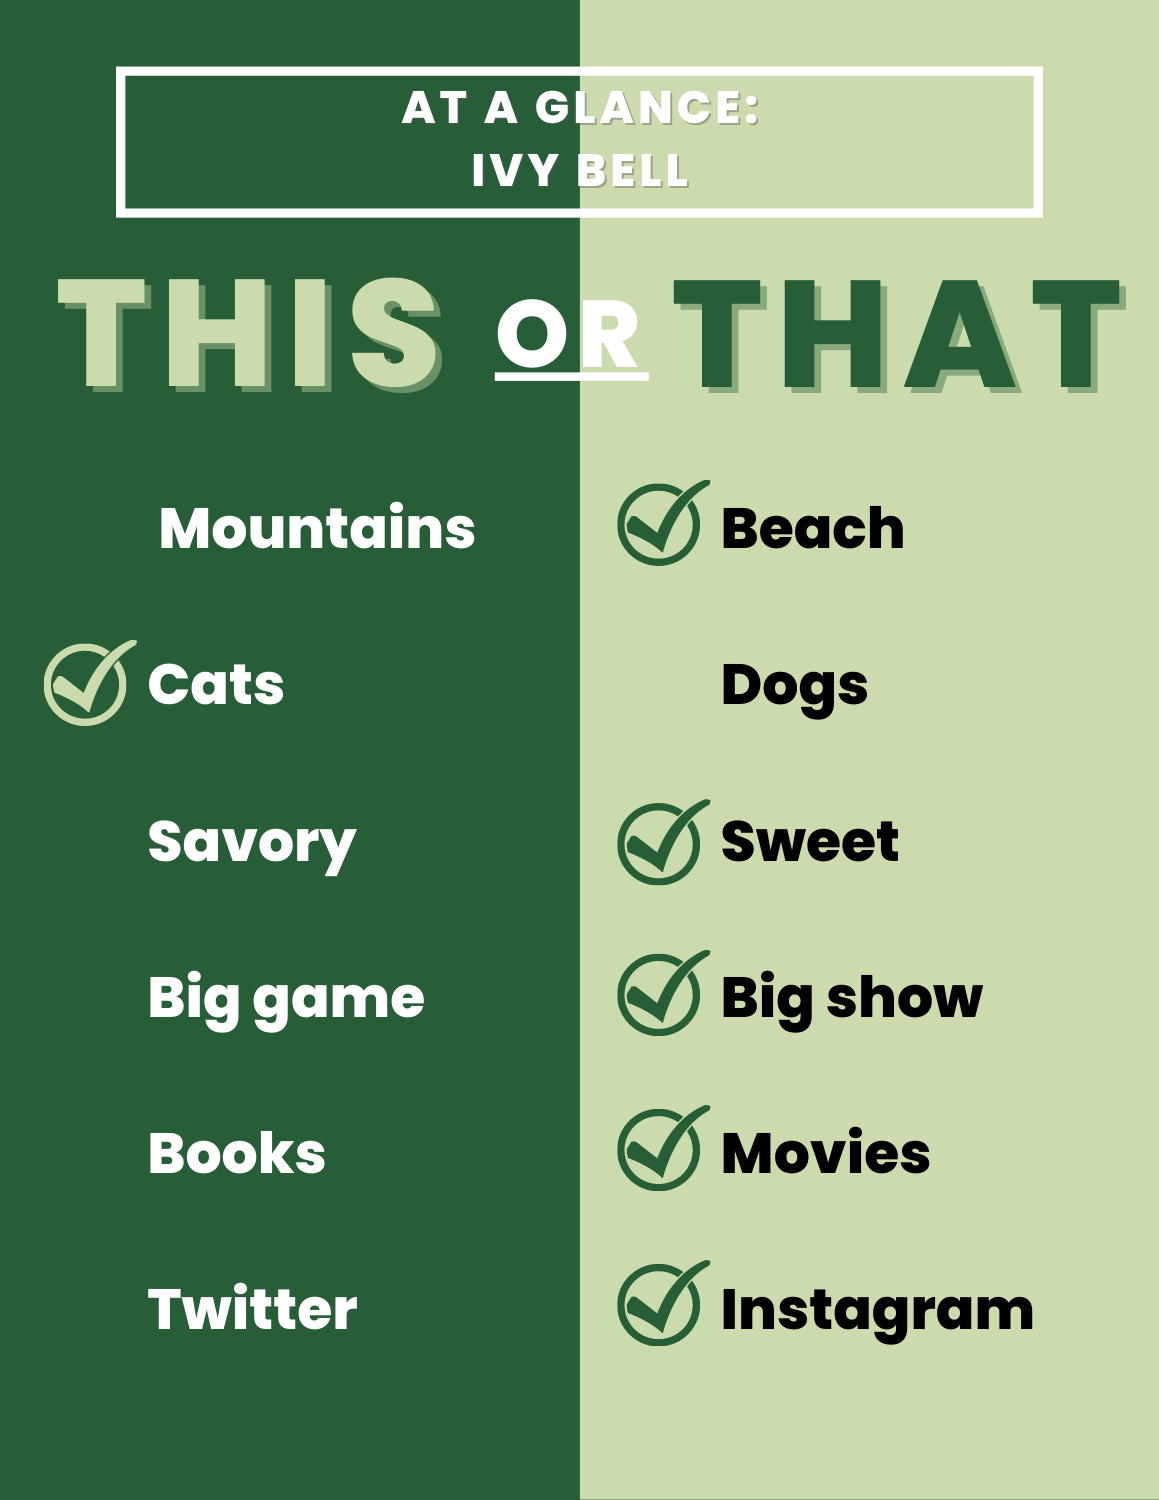 Green "This or That" graphic. Bell chooses beach over mountains, cats over dogs, sweet over savory, big game over big show, movies over books and Instagram over Twitter.